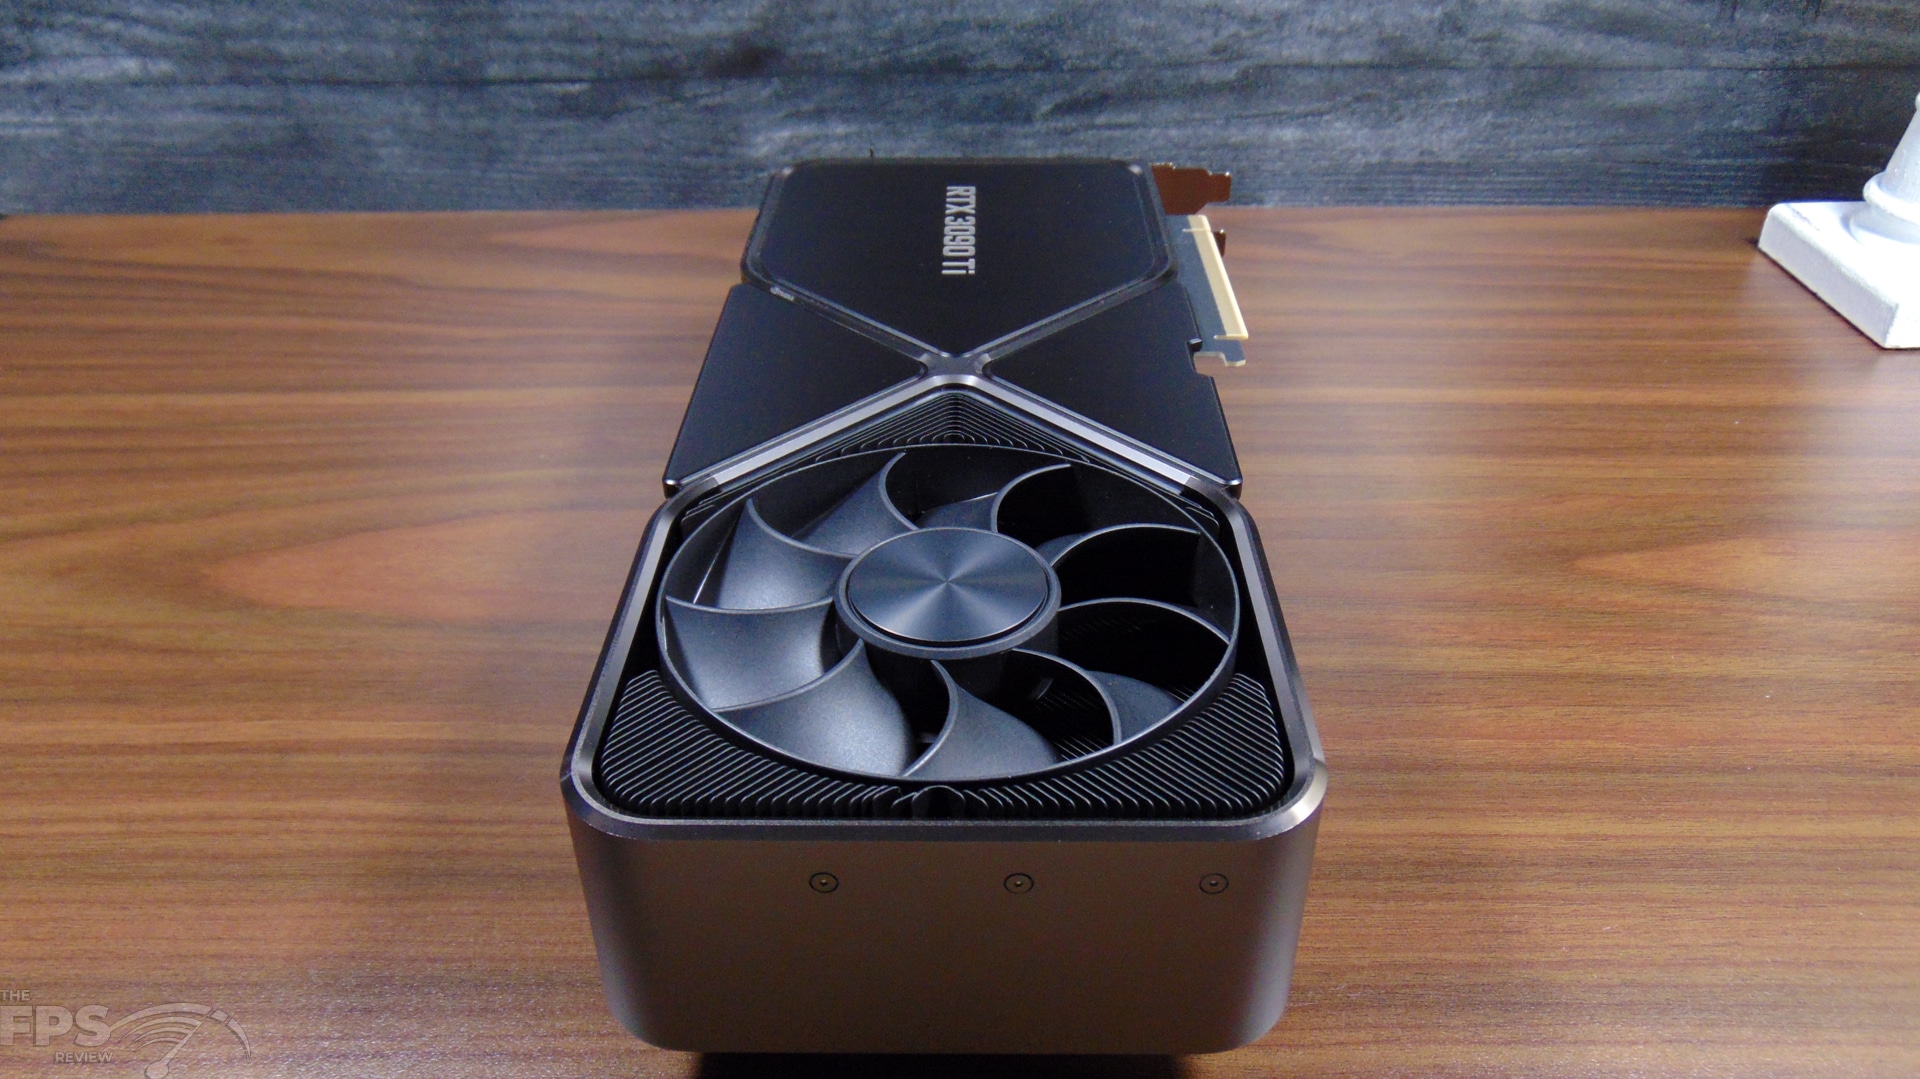 NVIDIA GeForce RTX 3090 Ti Founders Edition Video Card Review